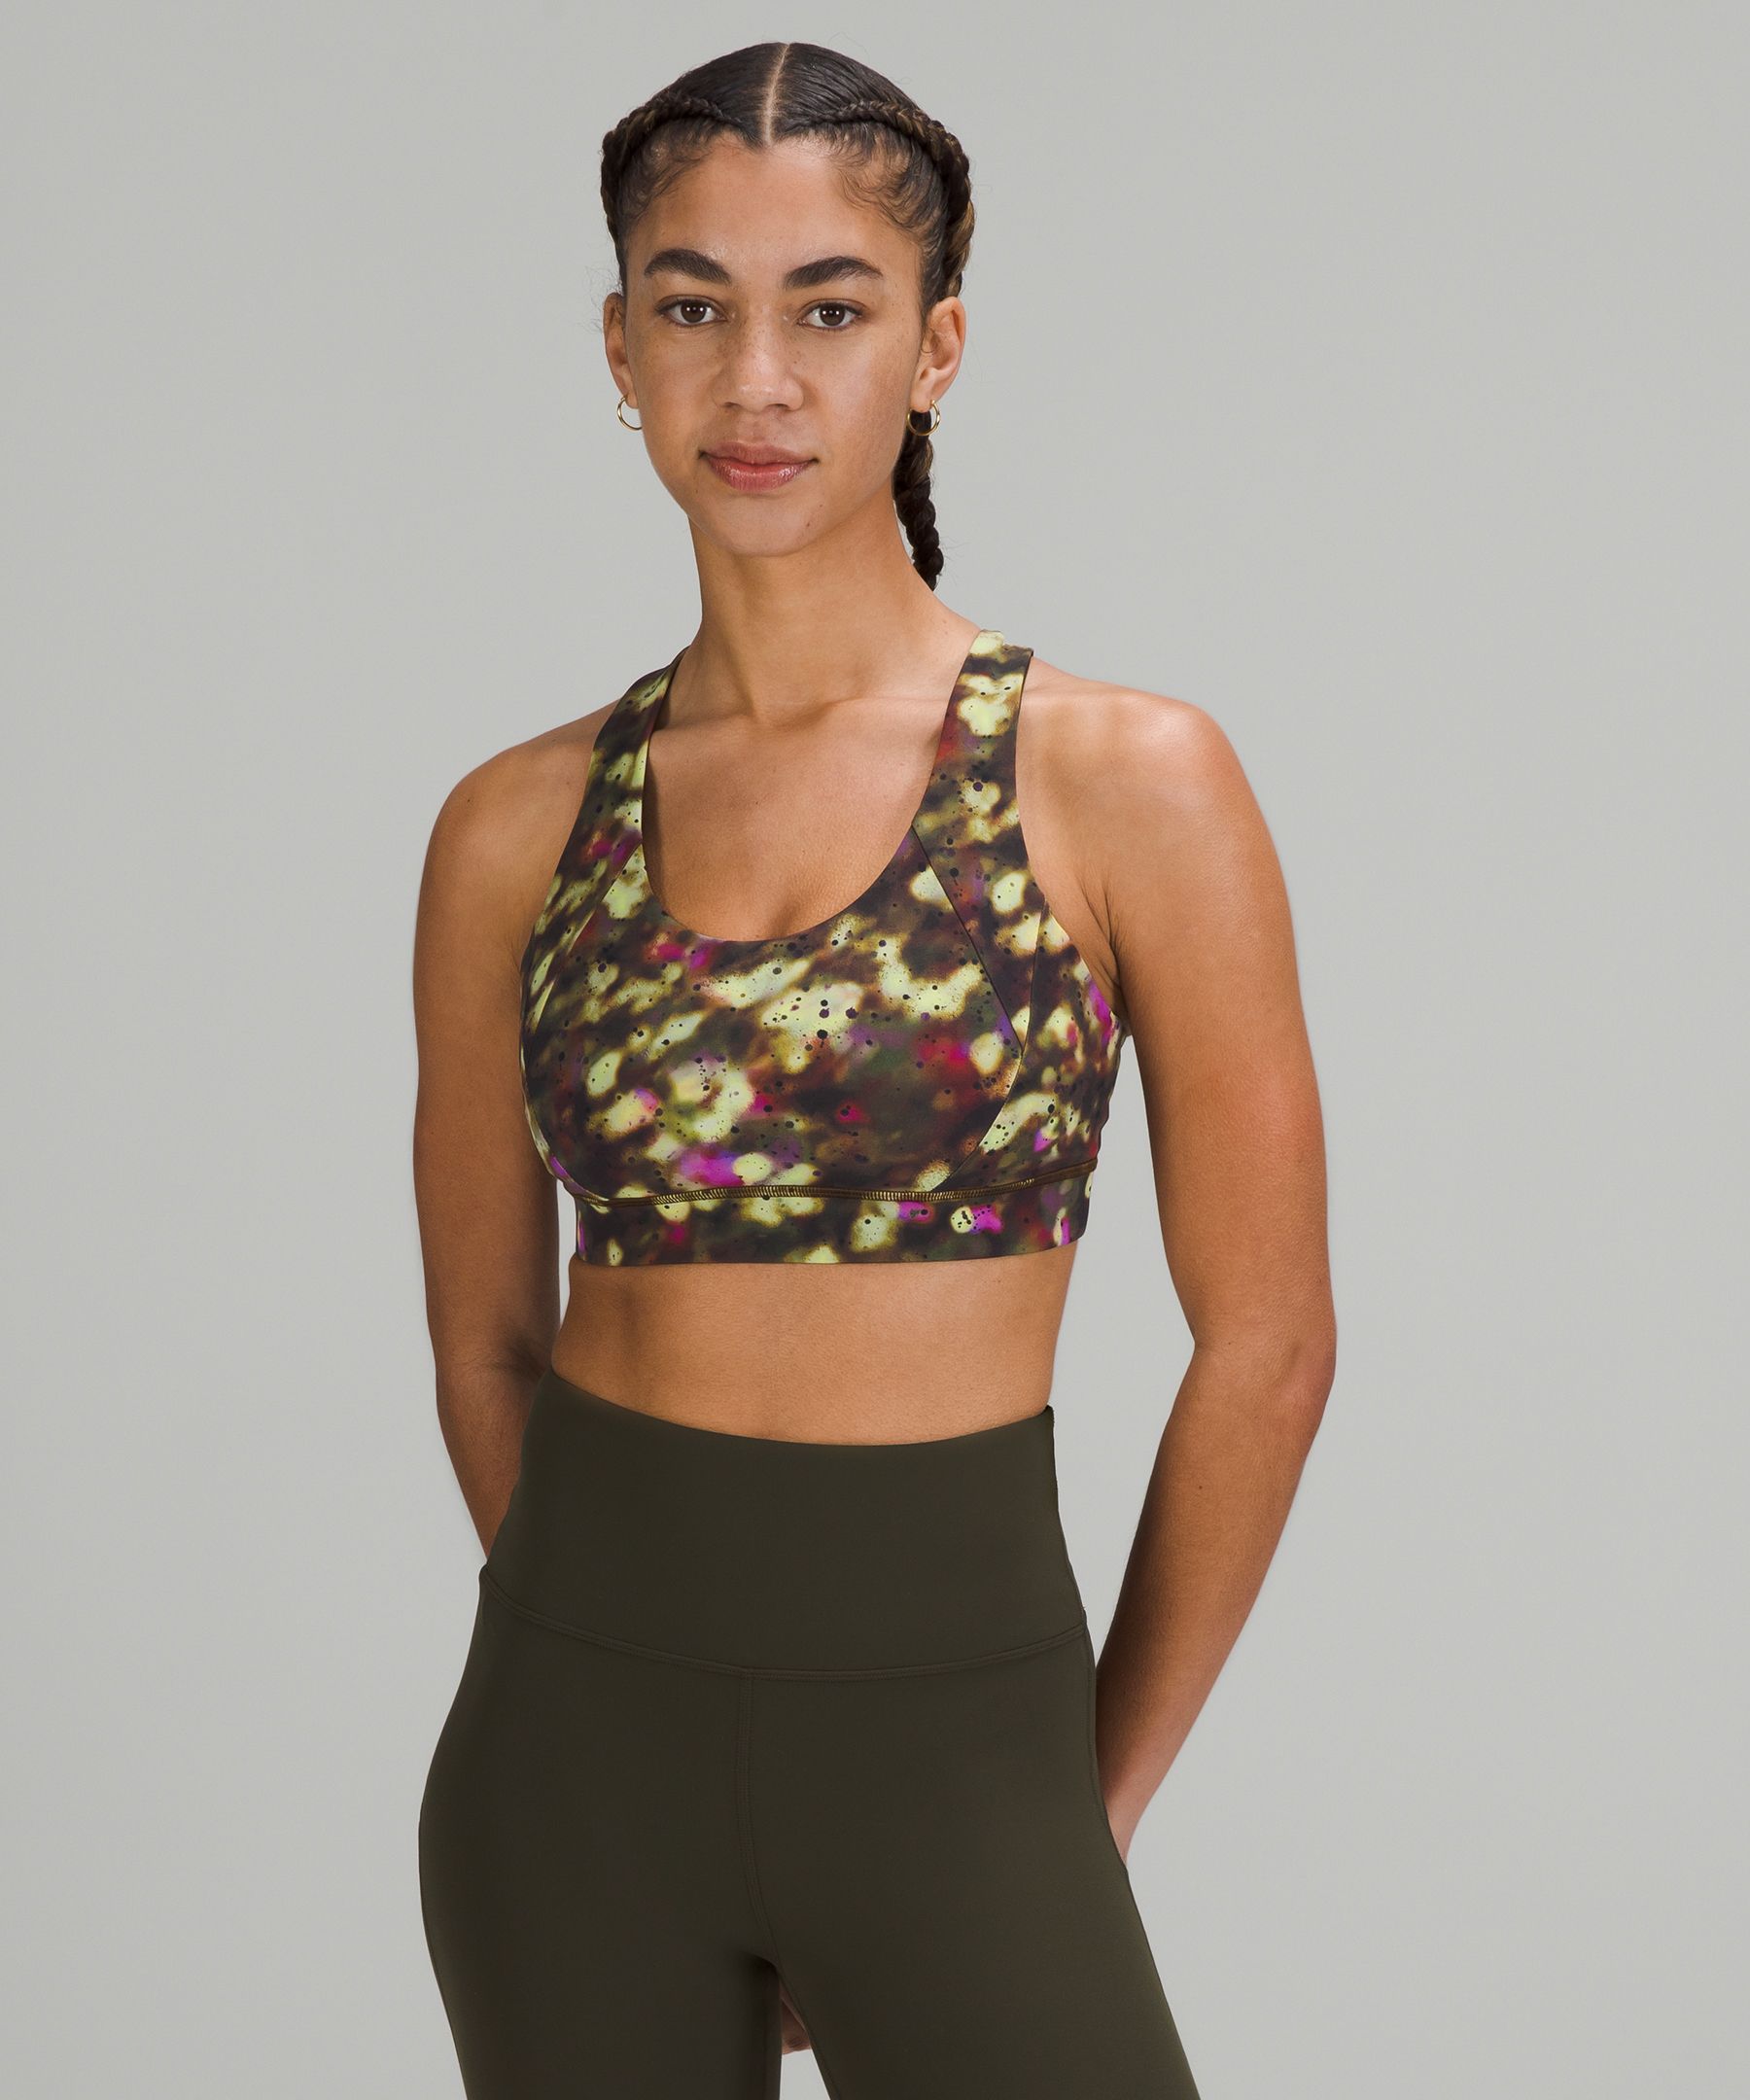 Lululemon Free To Be Elevated Bra Light Support, Dd/ddd(e) Cup In Soft Focus Splatter Green